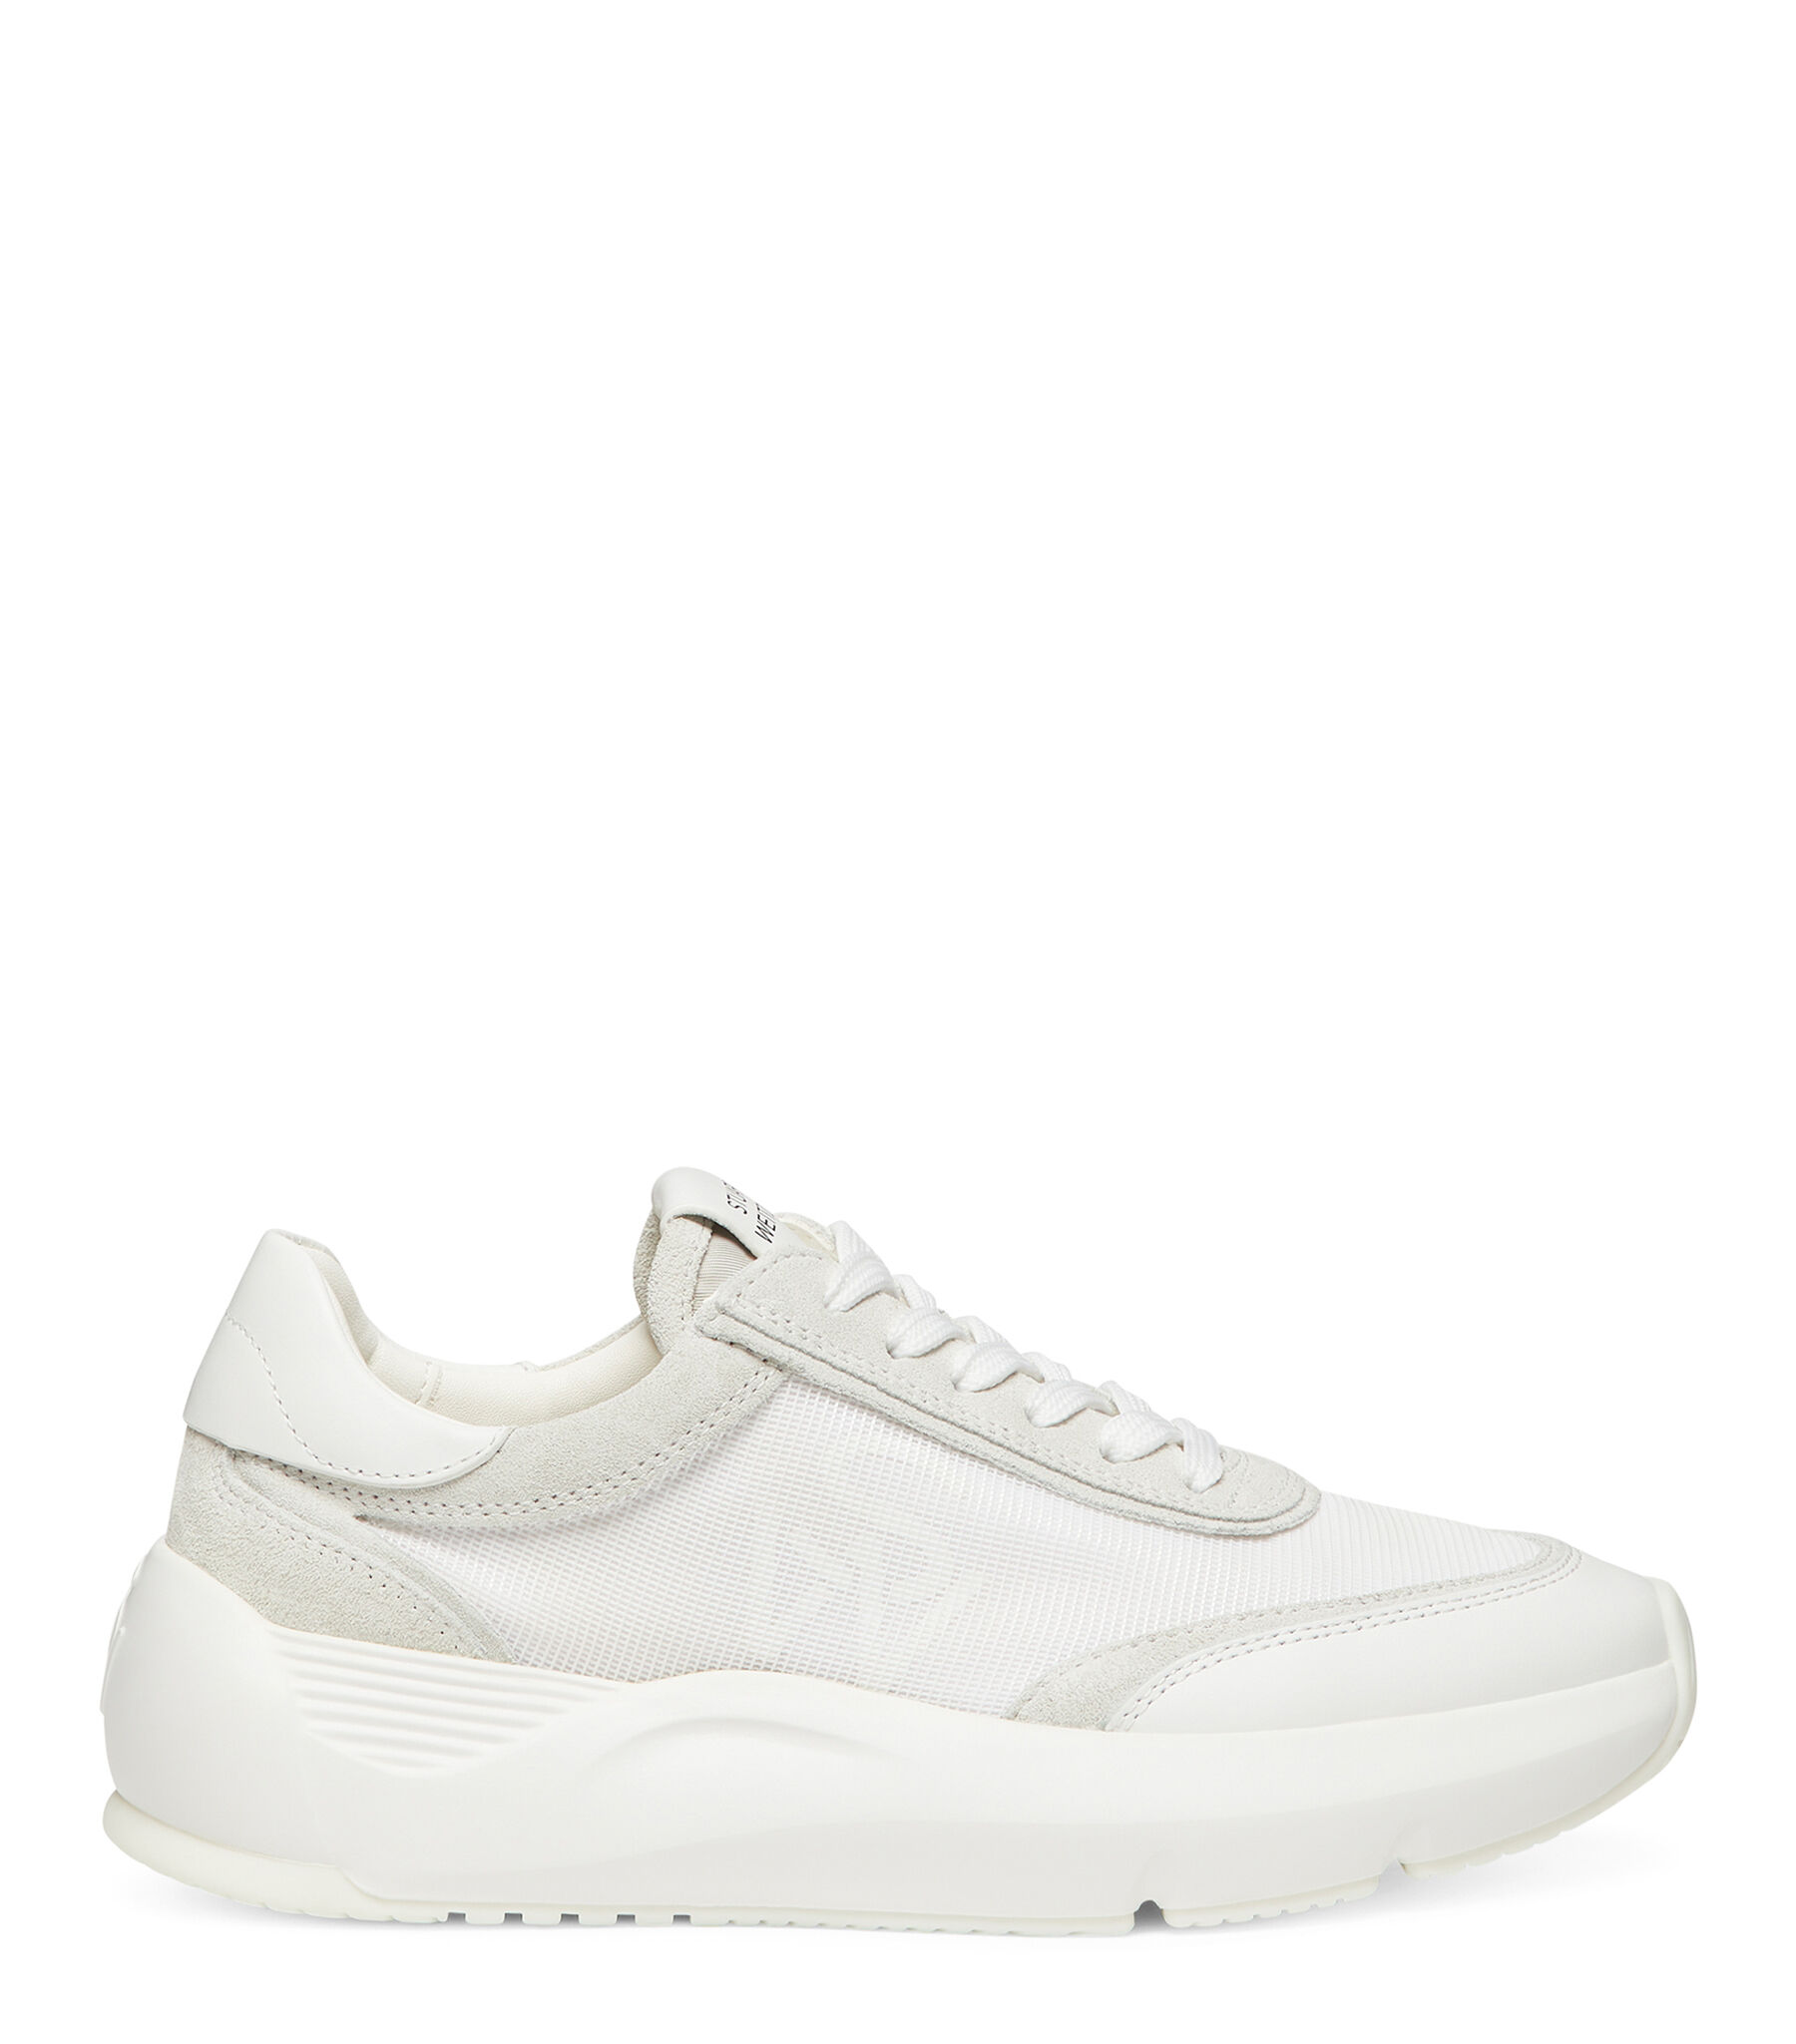 Stuart Weitzman Sw Glide Lace-up Sneaker - Donna Sneakers White 40